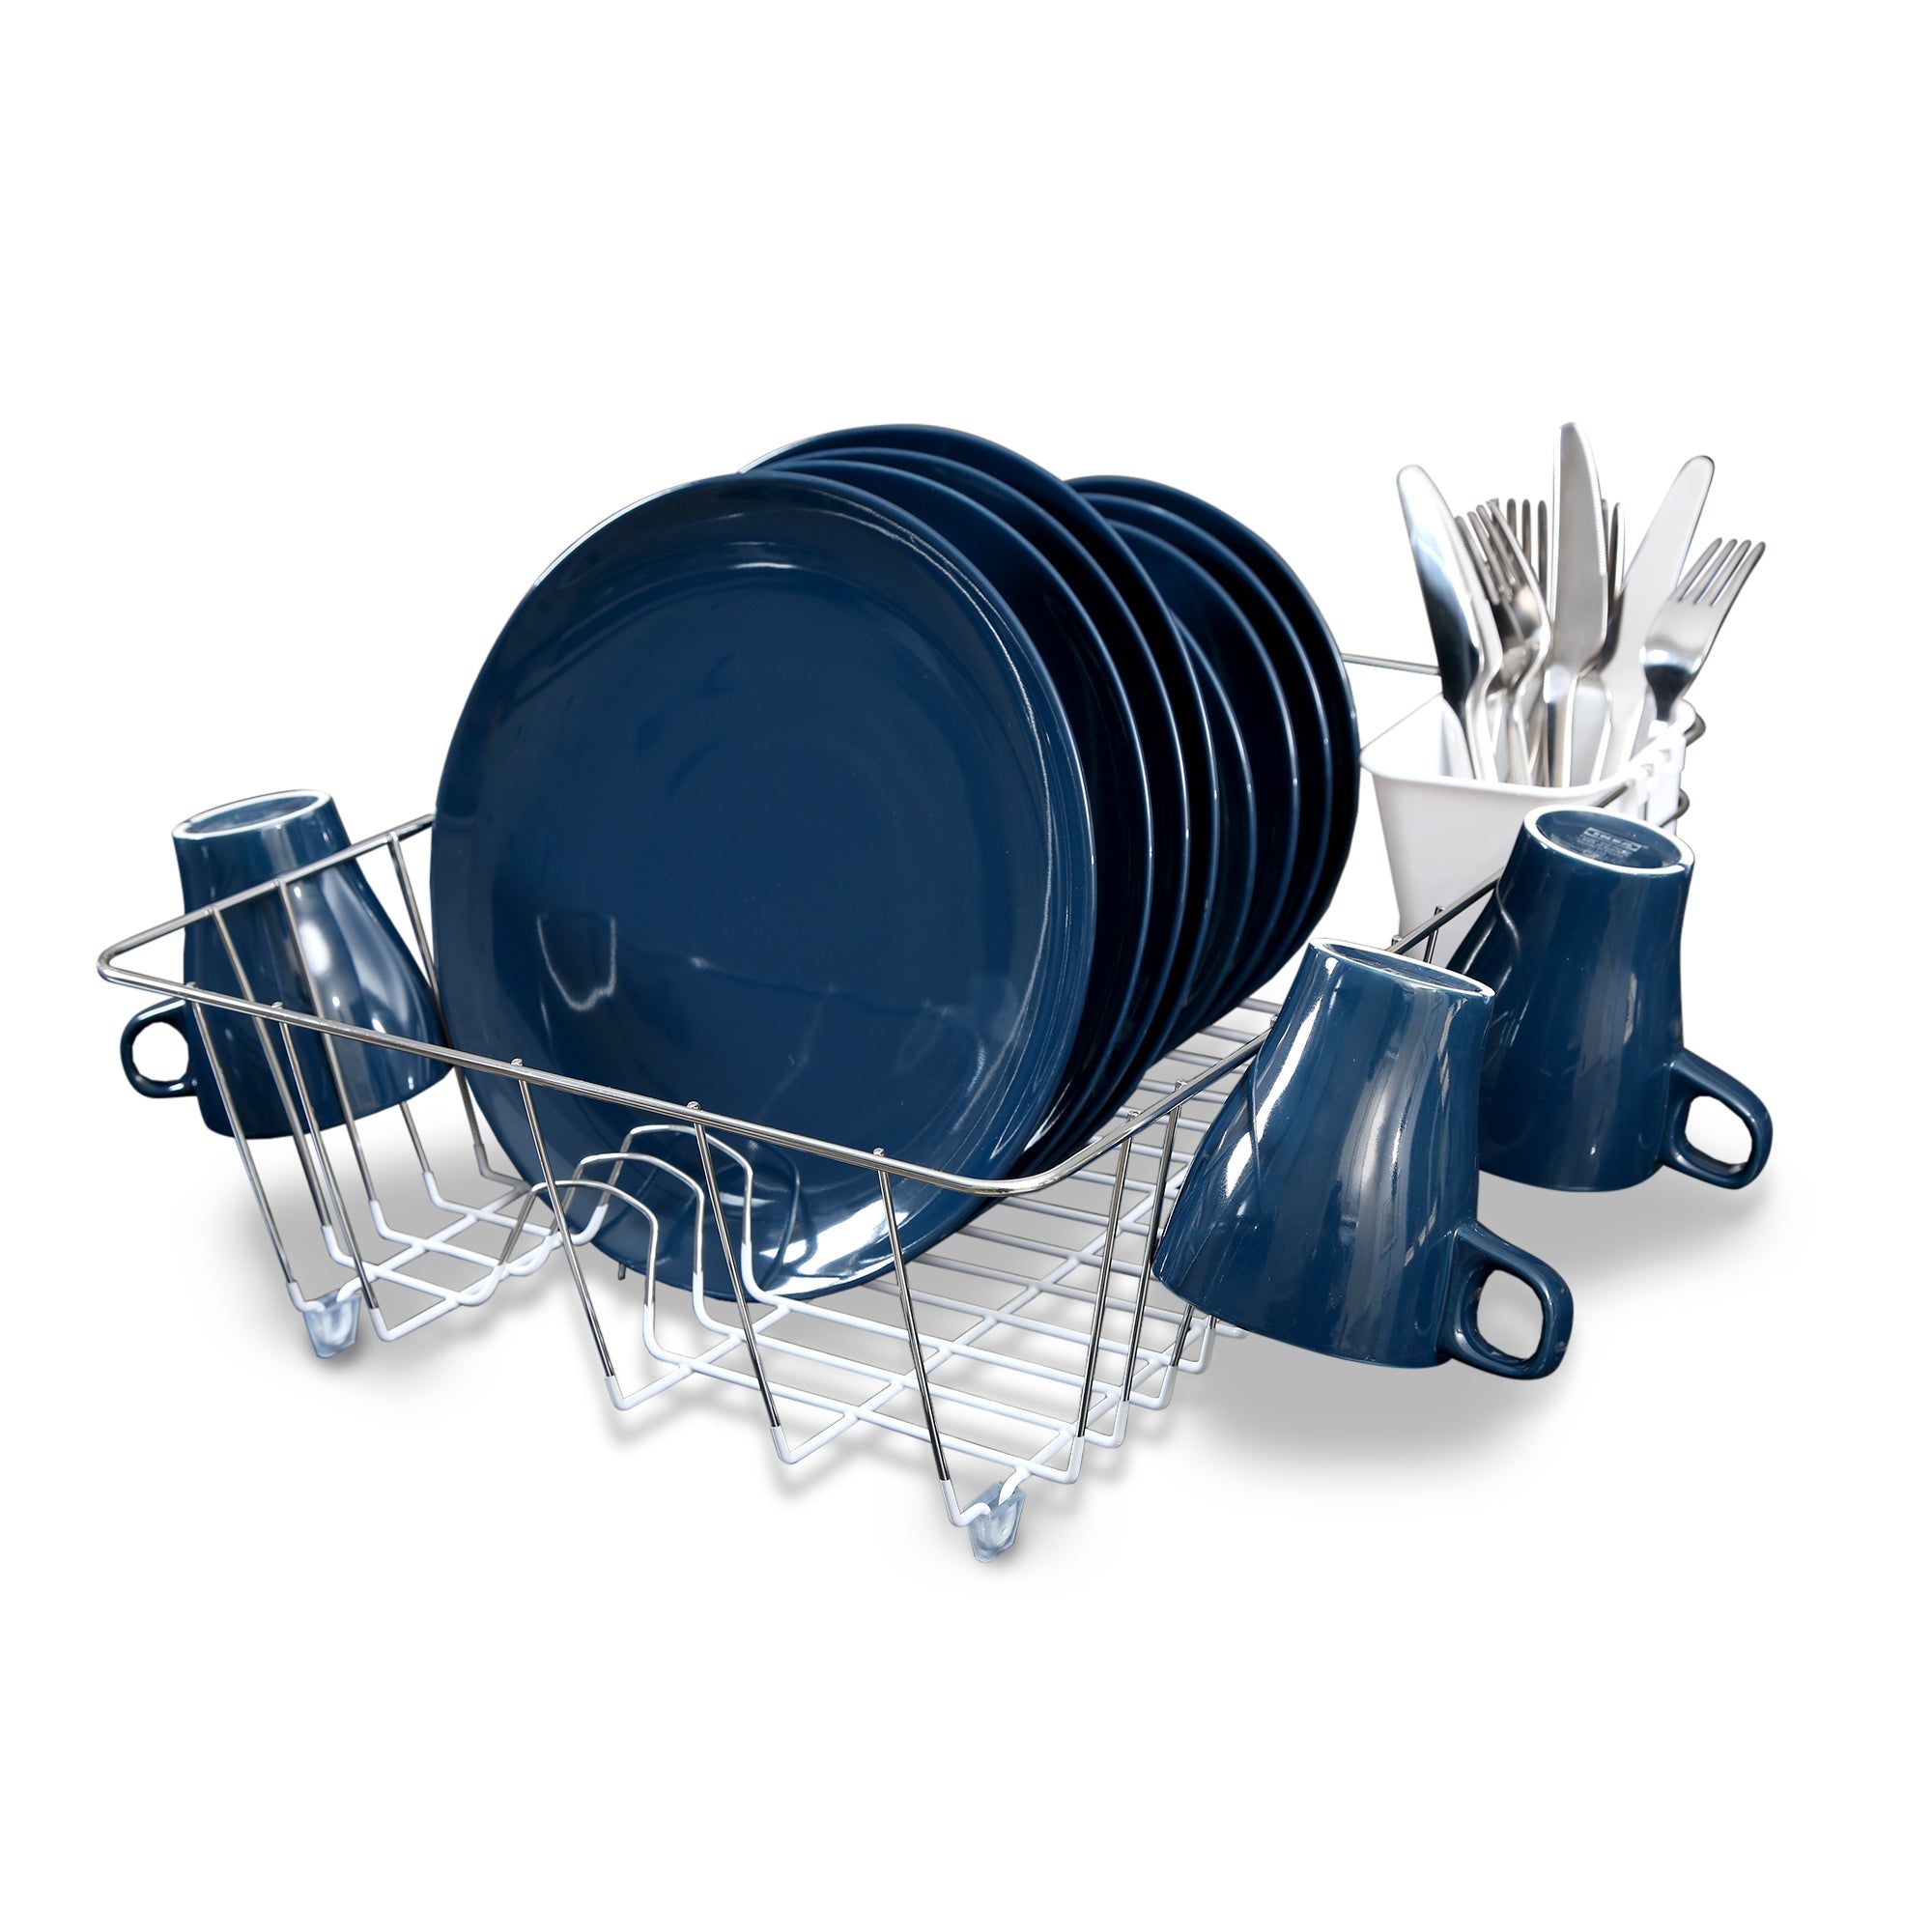 Dish Drainer Rack for In Sink or Counter Drying - Large - Smart Design® 8